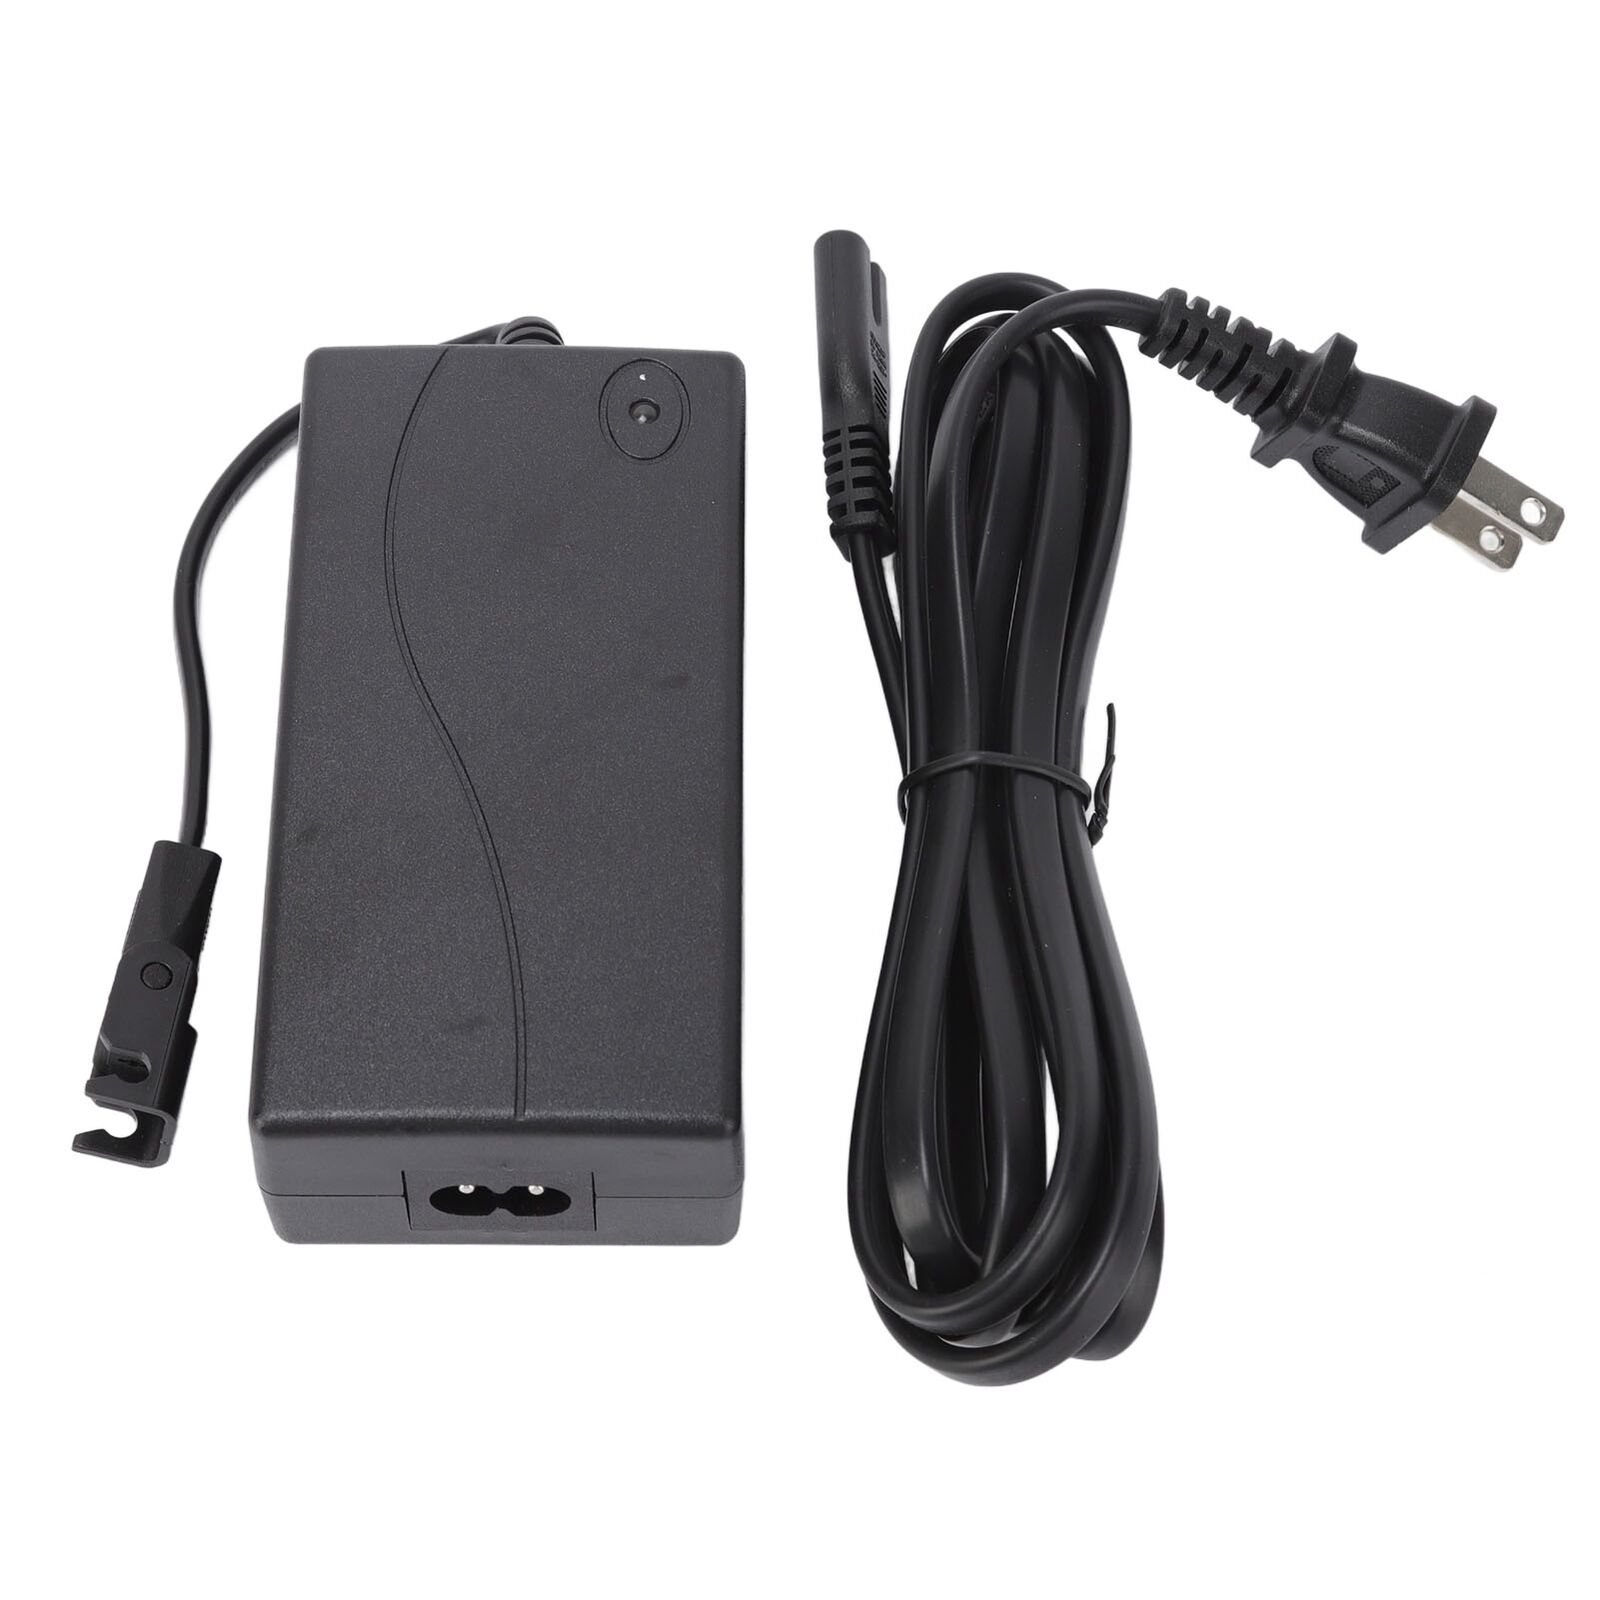 Recliner Power Supply Durable AC DC Adapter Waterproof Lift Chair Power Supply Feature: 1. Wide Compatibility: The rec